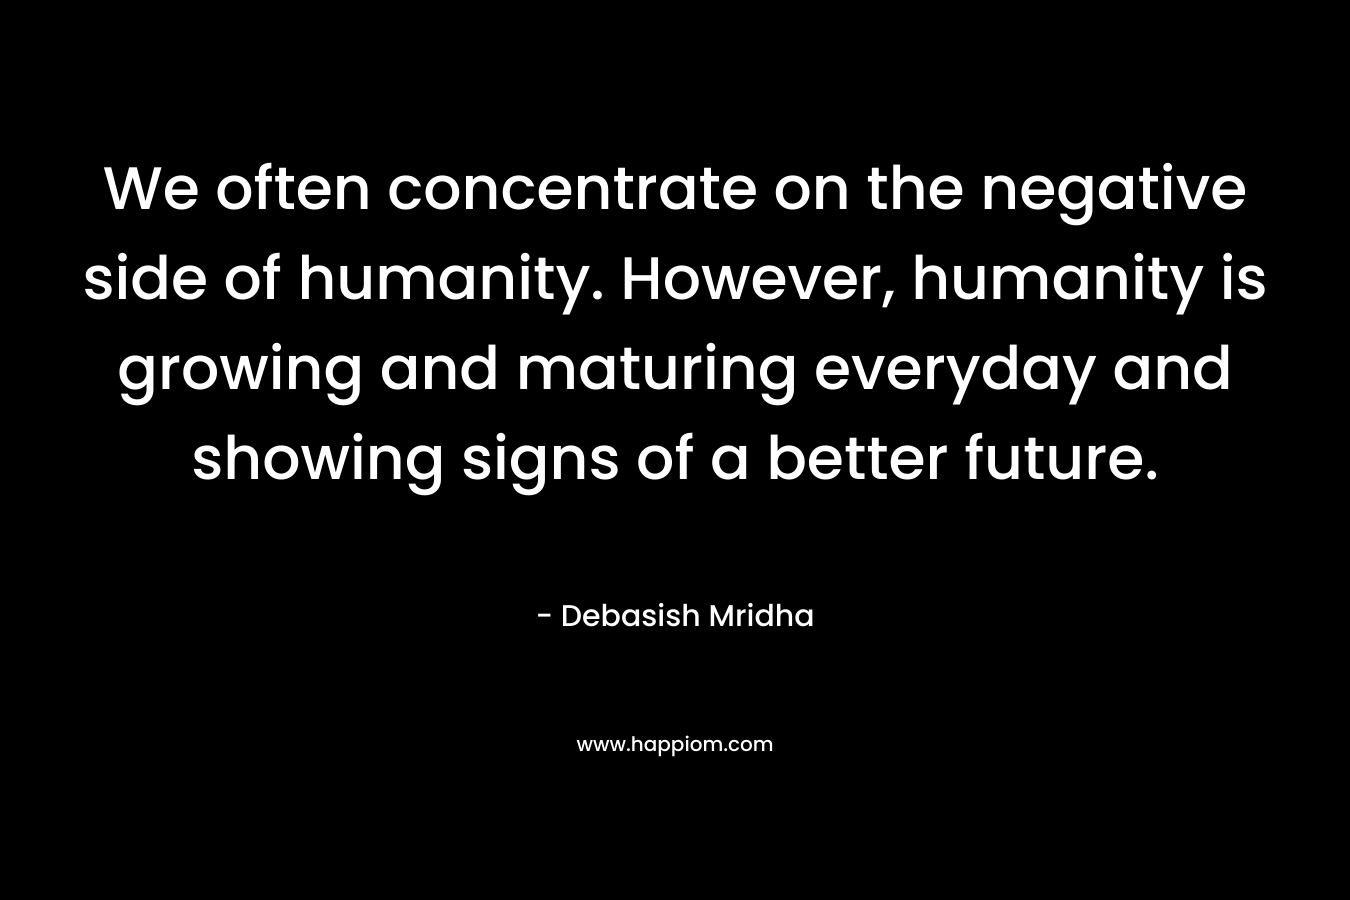 We often concentrate on the negative side of humanity. However, humanity is growing and maturing everyday and showing signs of a better future. – Debasish Mridha